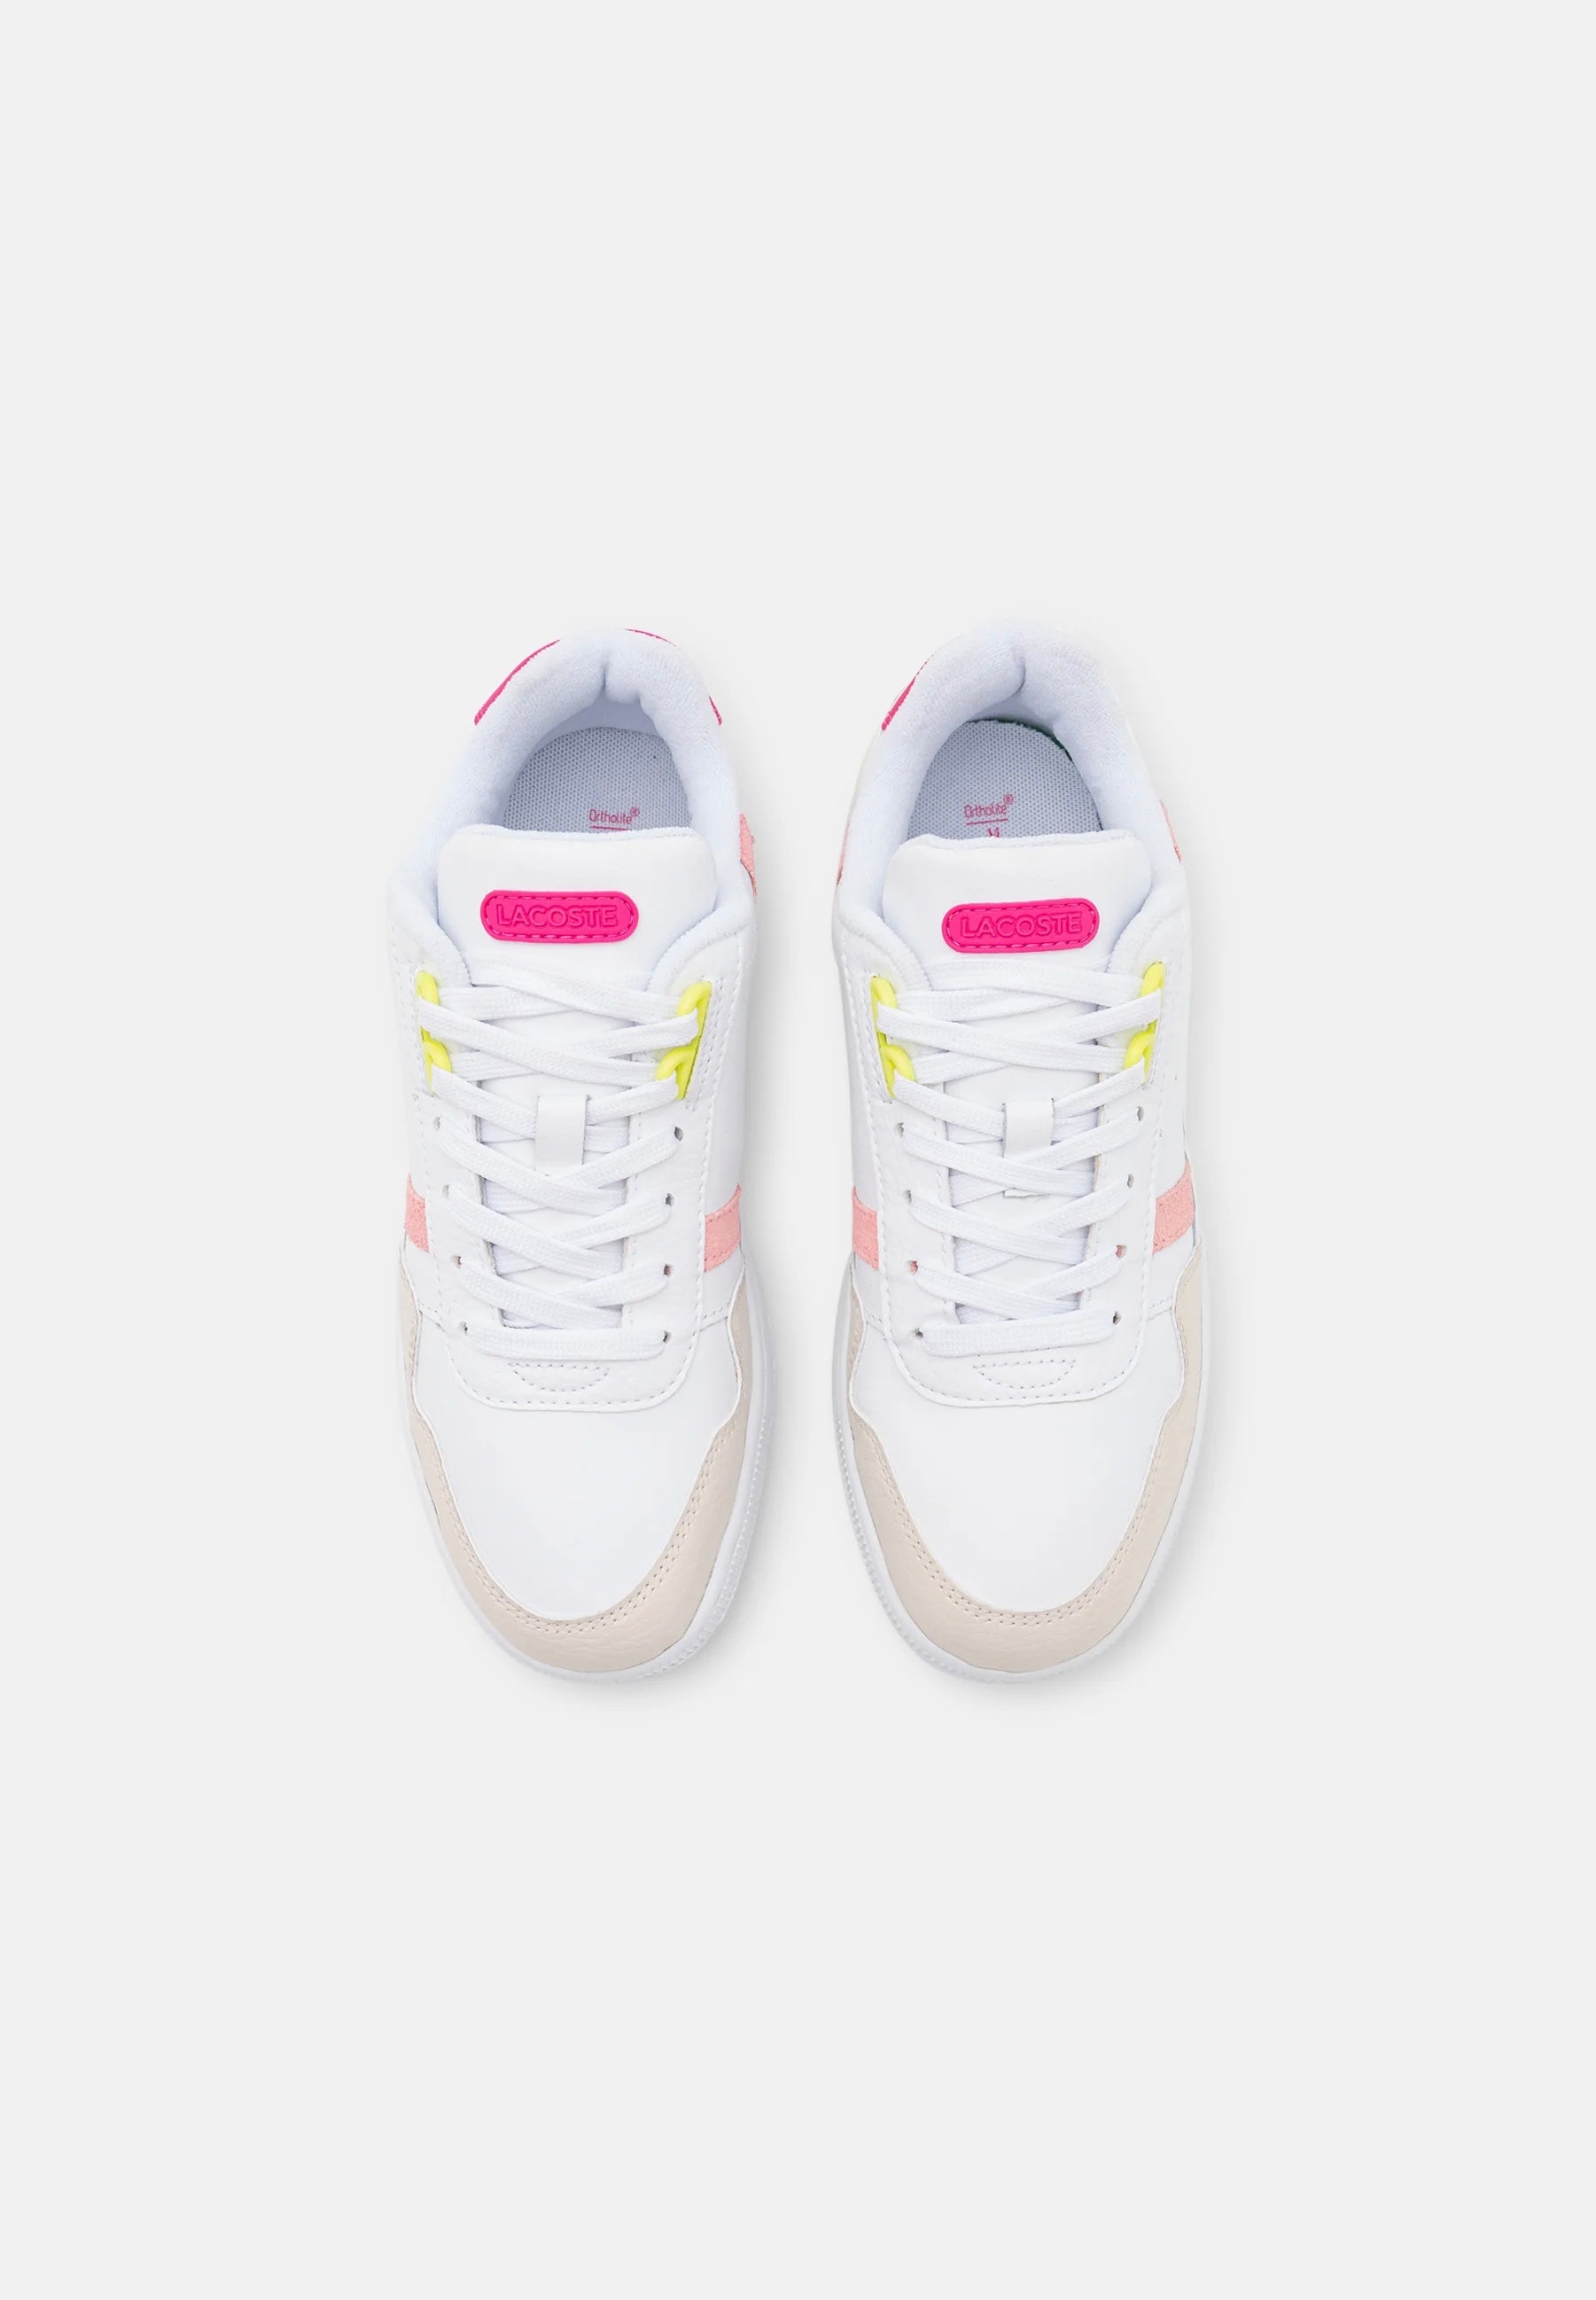 Women’s Leather T-Clip Sneakers White/Pink